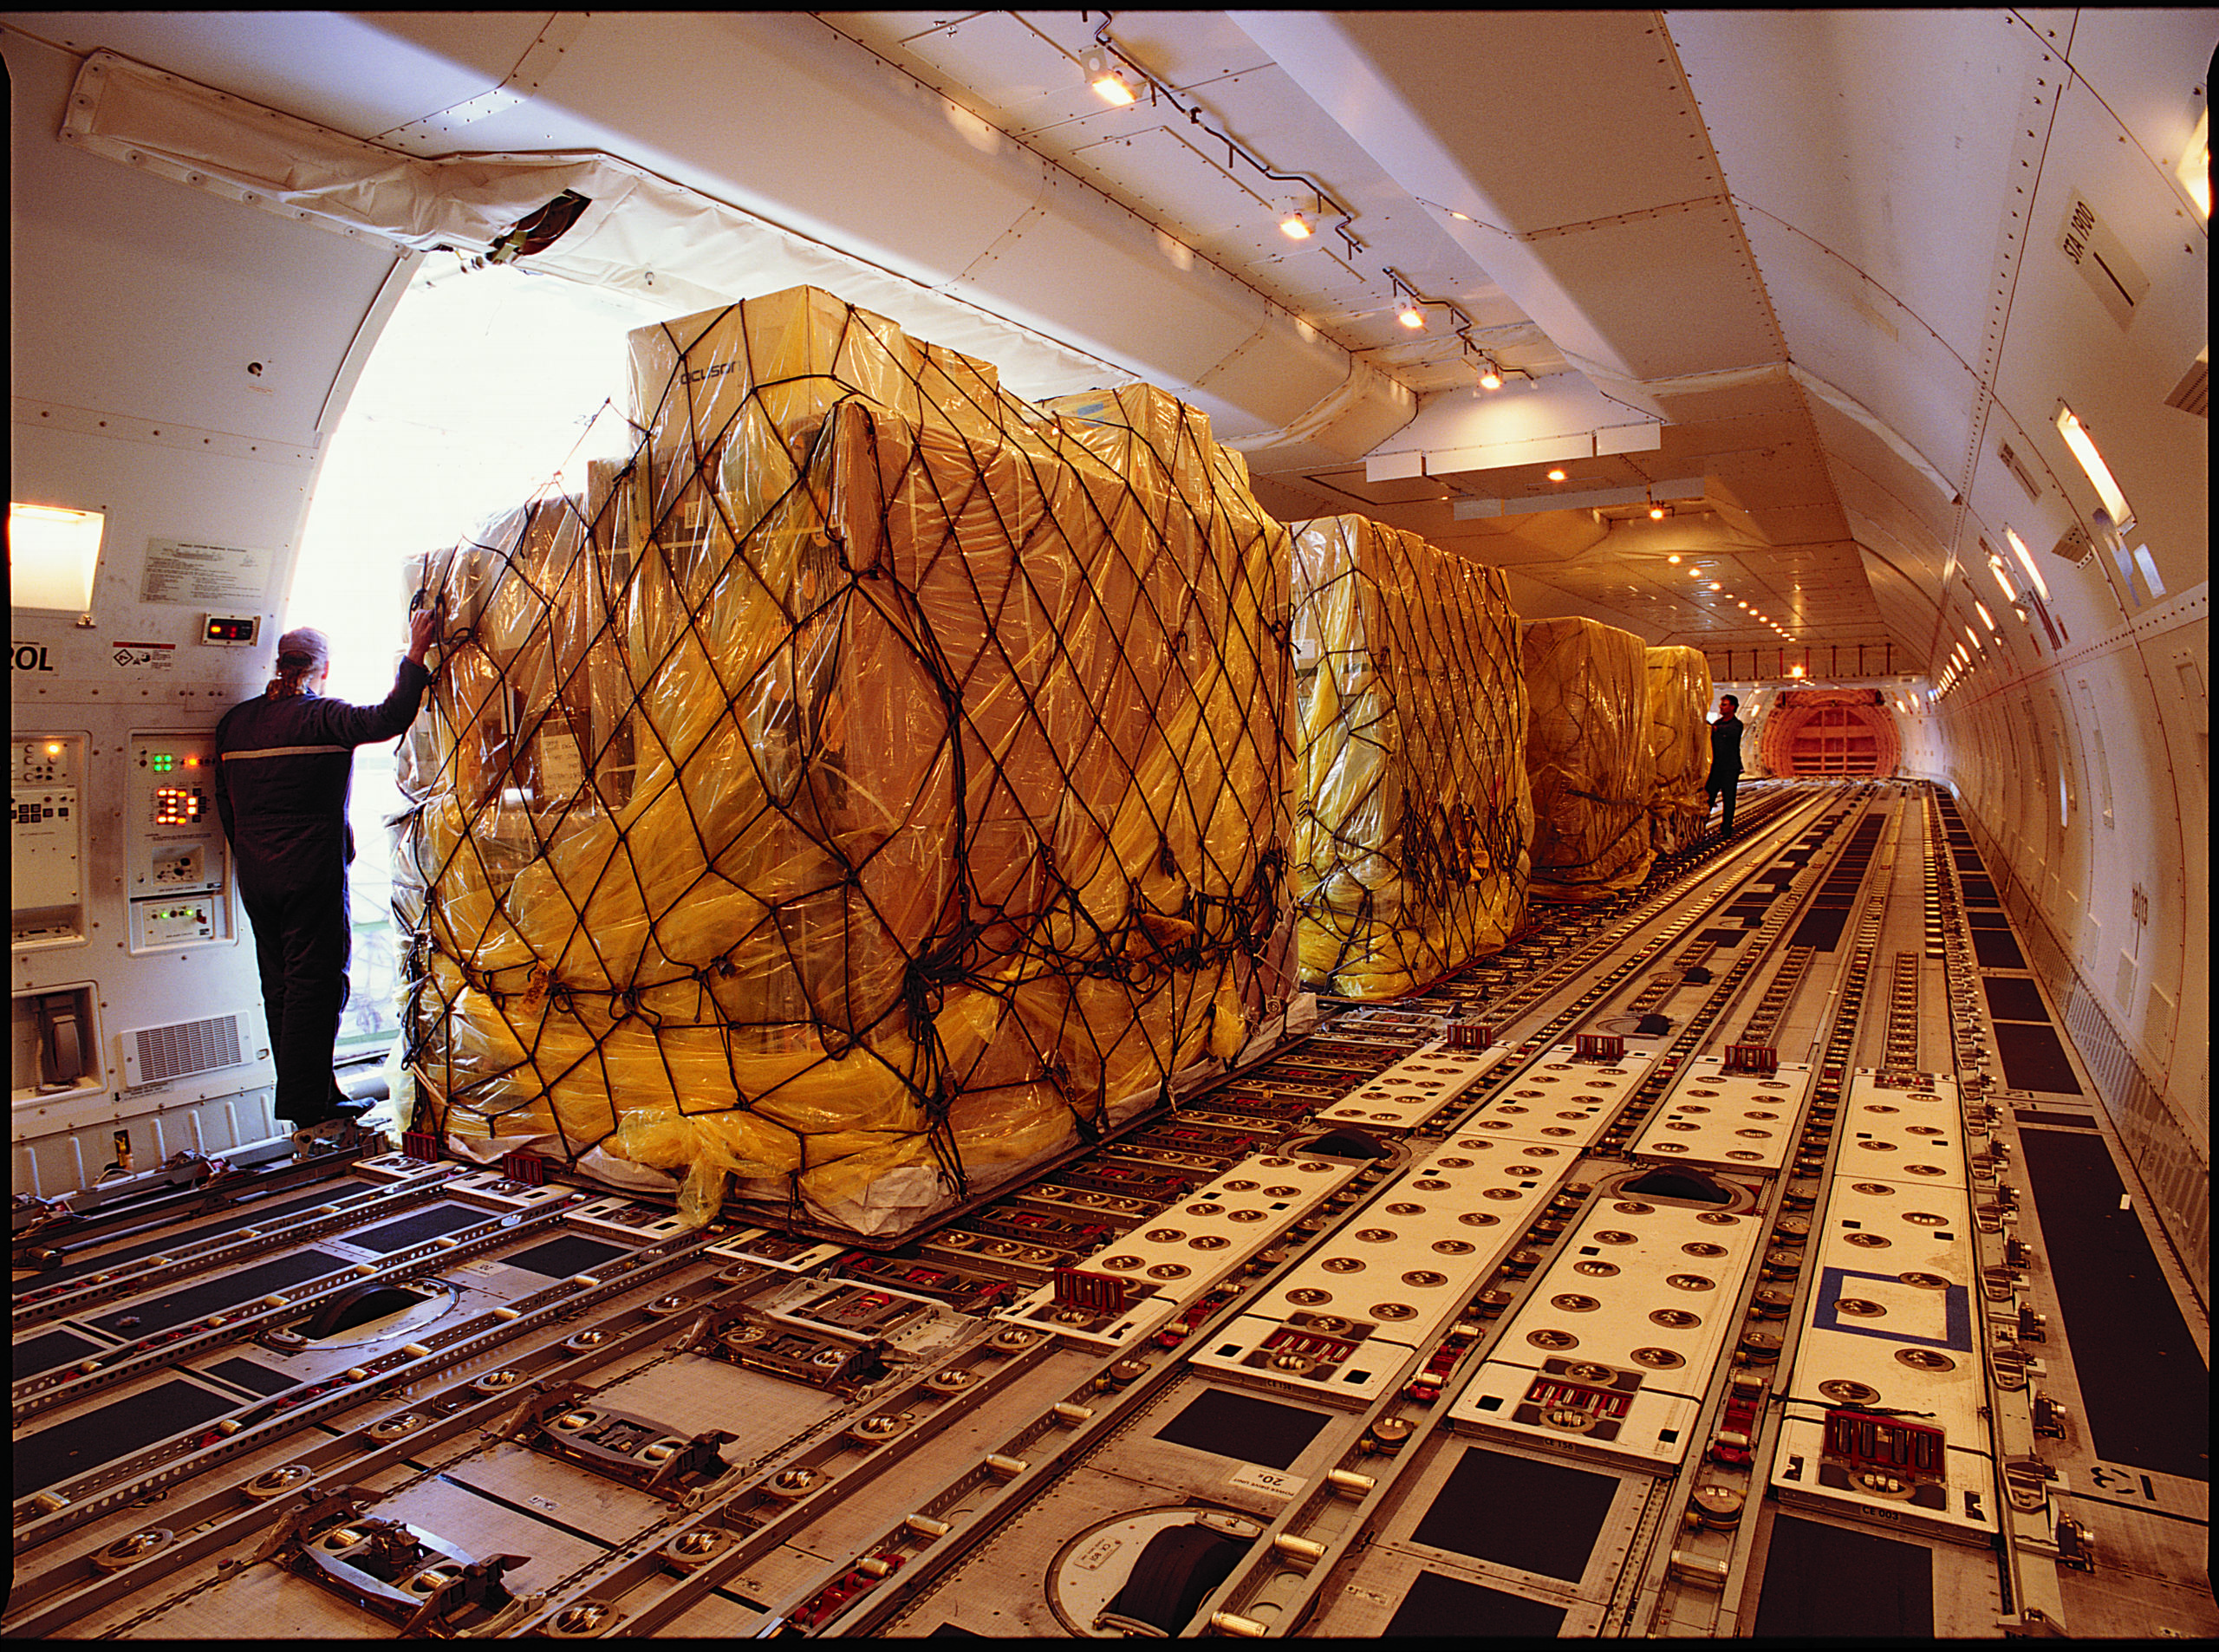 747 freighters continue to play a major role in the air freight industry. As they age, what will replace them?